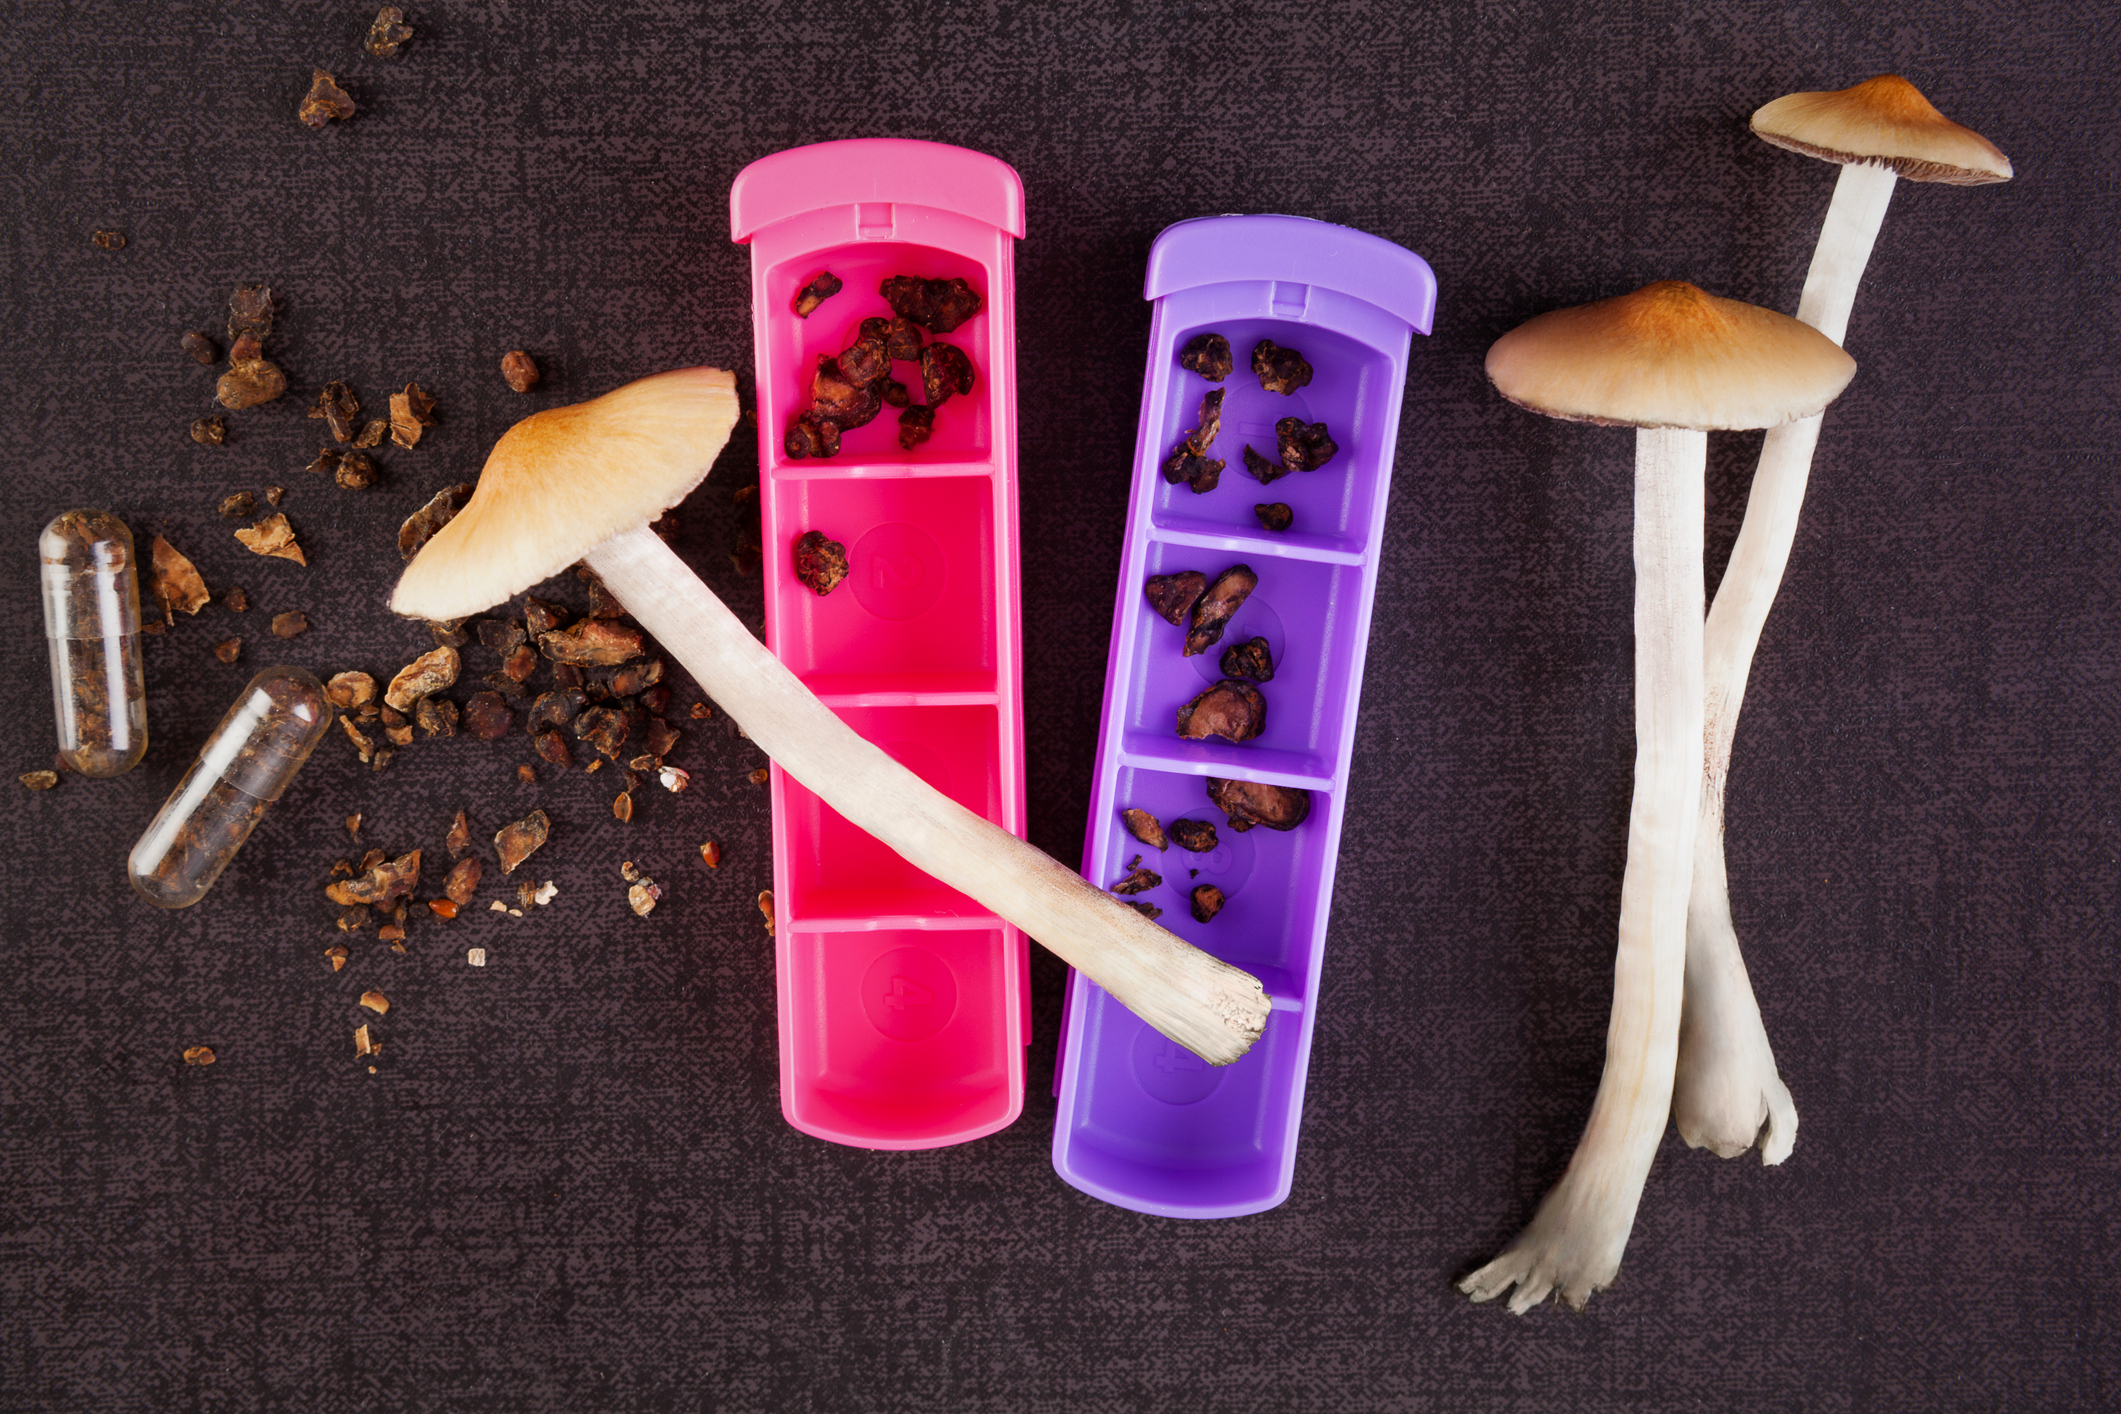 Weekly Weed News Roundup: Magic Mushroom Reform Gains Momentum, PA Pushes for Legal Pot